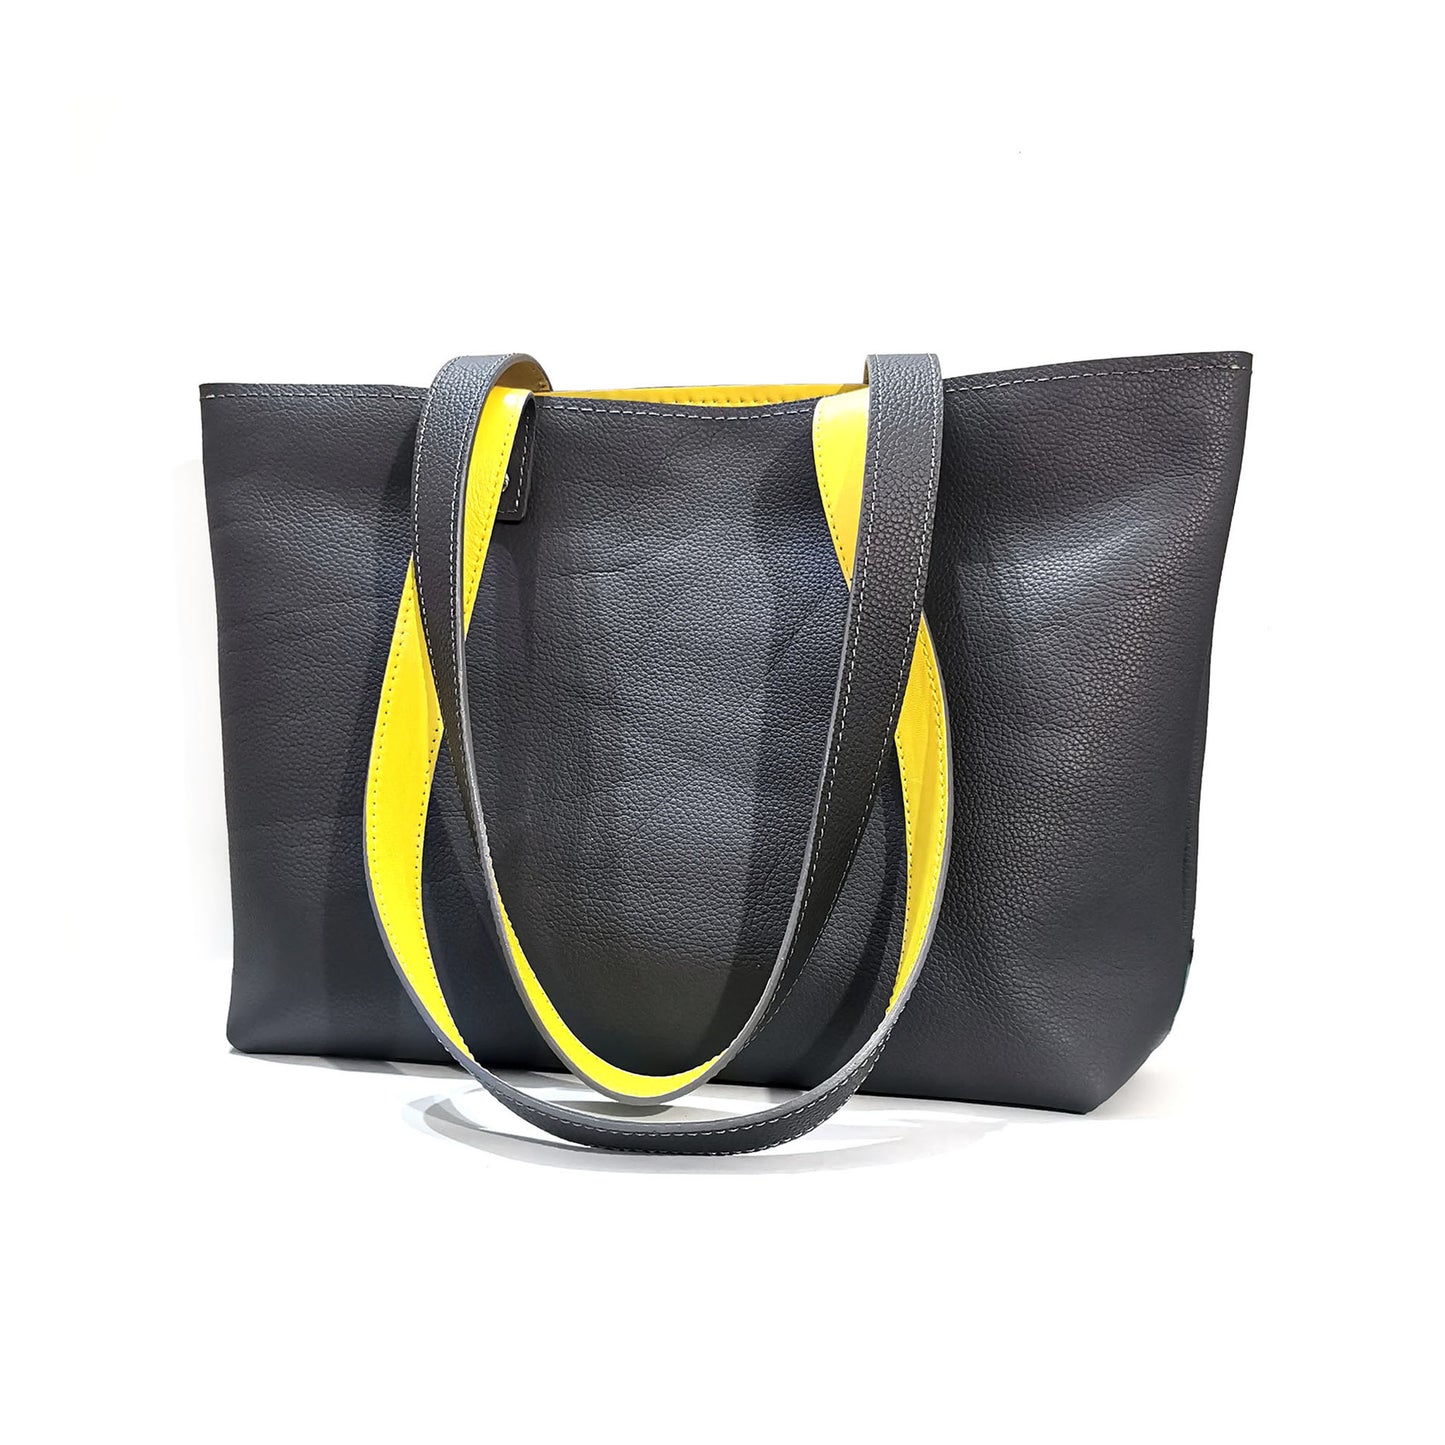 Gray and yellow leather tote bag | Vera